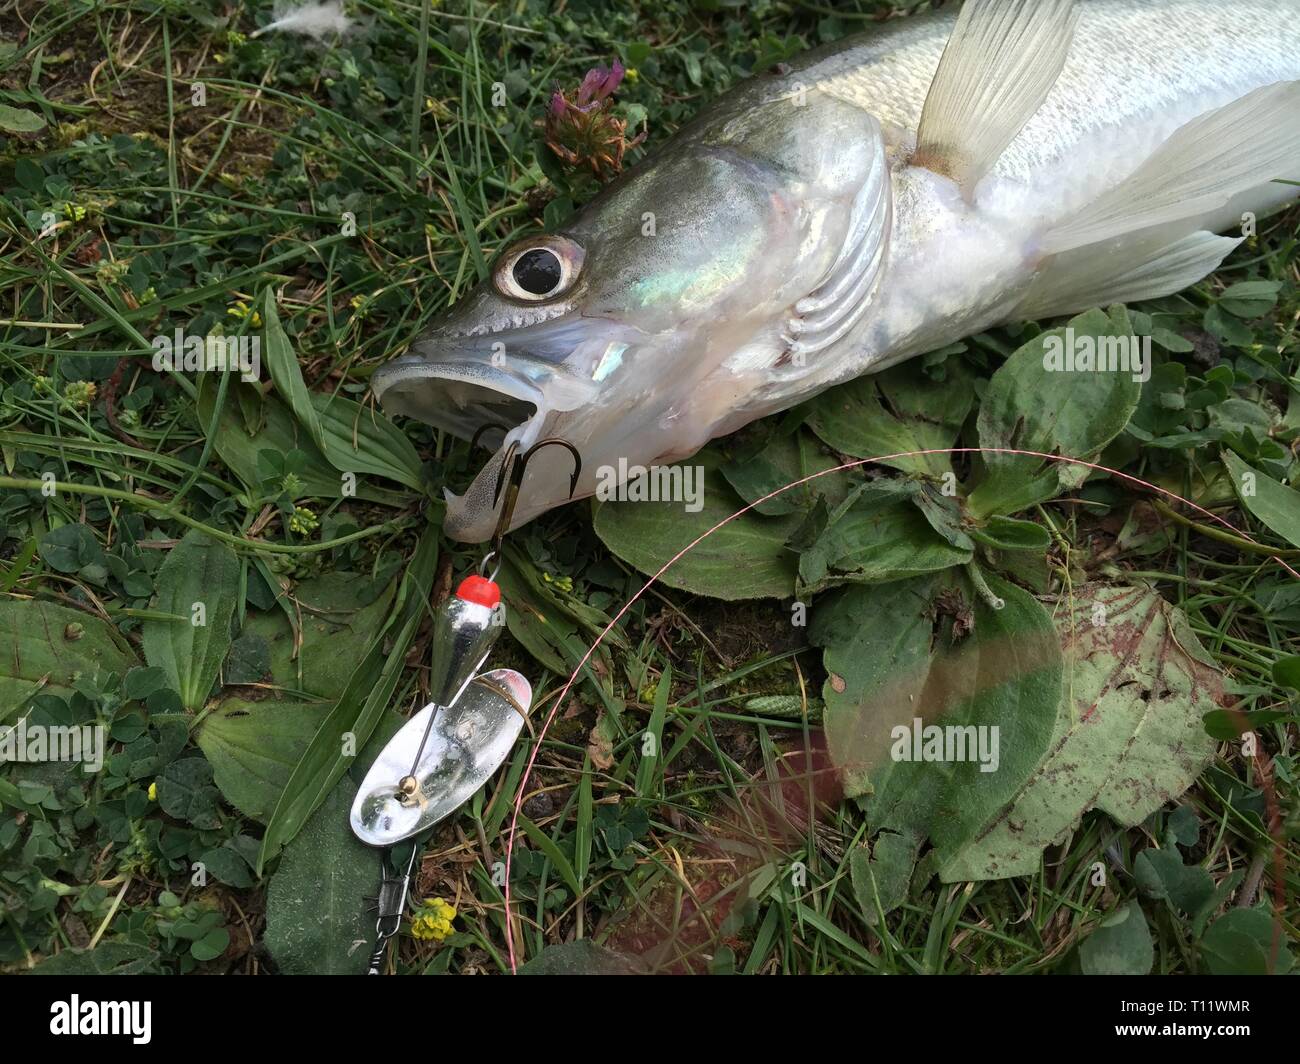 a baby zander was caught with the spinning rod and a small spinner